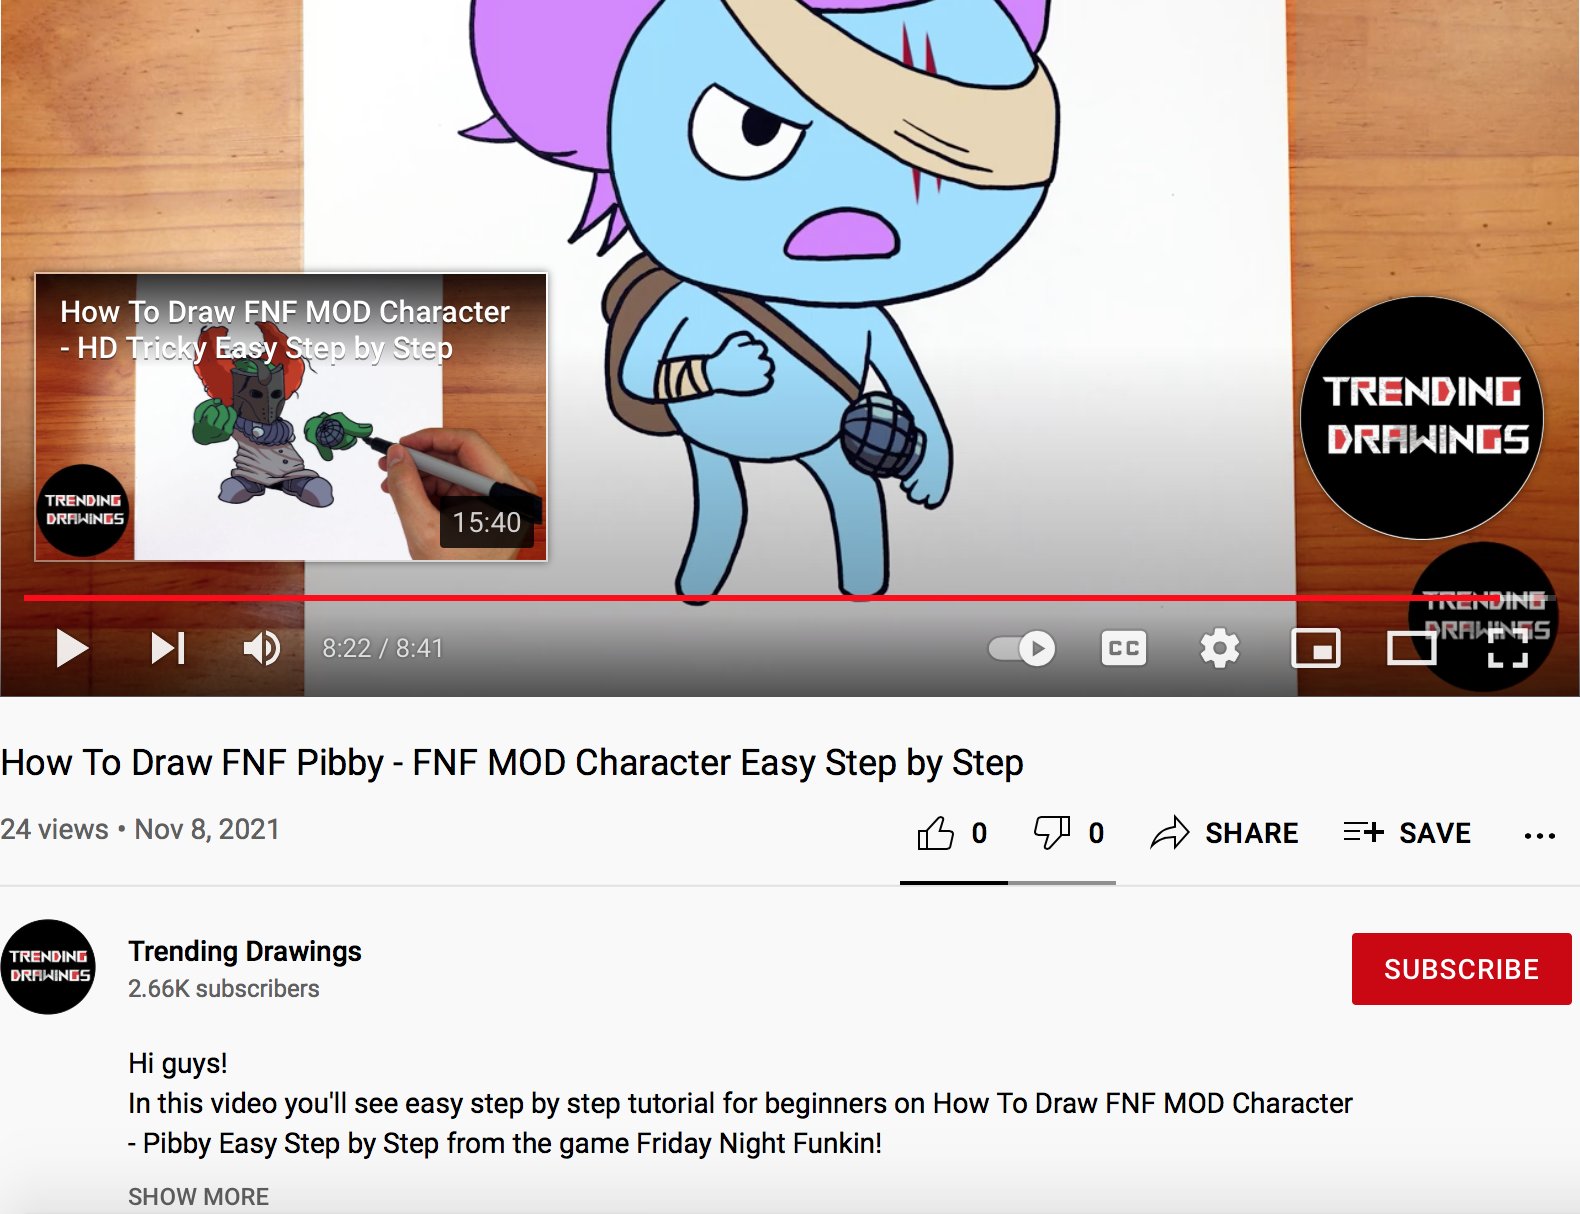 How to Draw an Easy Friday Night Funkin Character - Really Easy Drawing  Tutorial